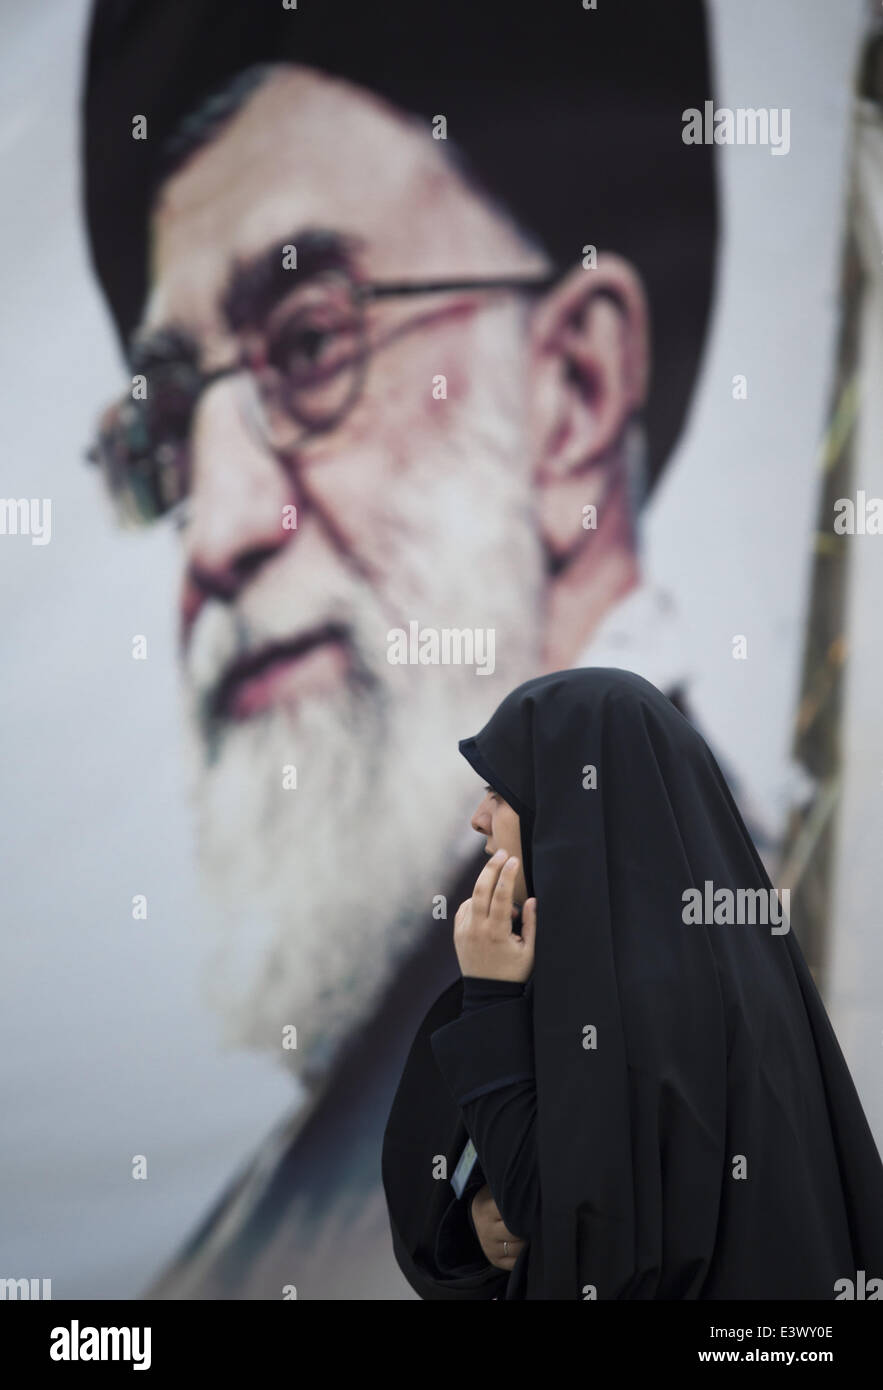 Tehran, Iran. 30th June, 2014. An Iranian woman walks past a portrait of Iran's Supreme Leader Ayatollah ALI KHAMENEI placed in the War museum while visiting of Tehran's Koran exhibition. The exhibition is an annual event during the month of Ramadan and this year, It is located in the War museum in the Iranian capital. Credit:  Morteza Nikoubazl/ZUMA Wire/ZUMAPRESS.com/Alamy Live News Stock Photo